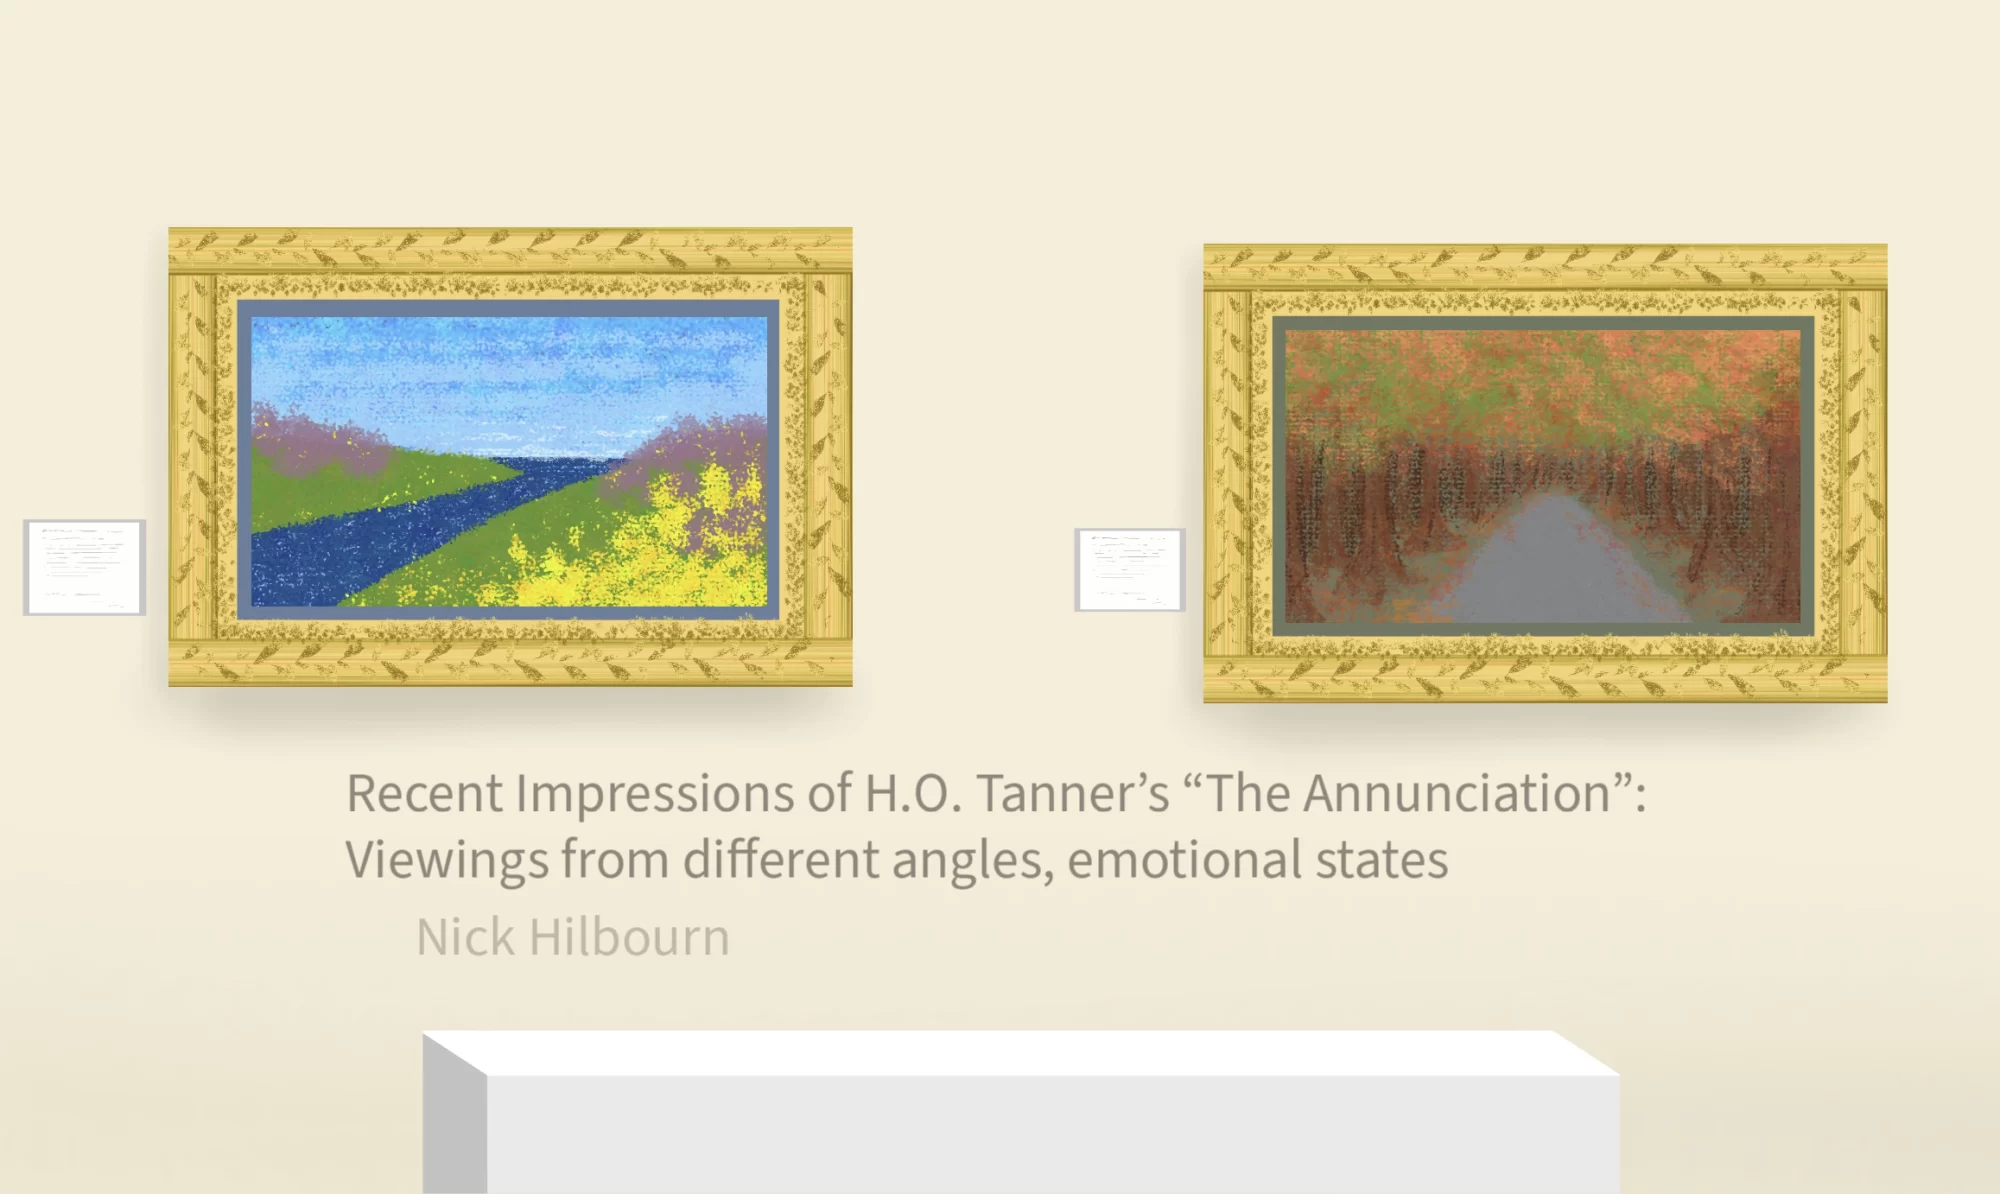 Recent Impressions of H.O. Tanner’s The Annunciation: Viewings from different angles, emotional states by Nick Hilbourn